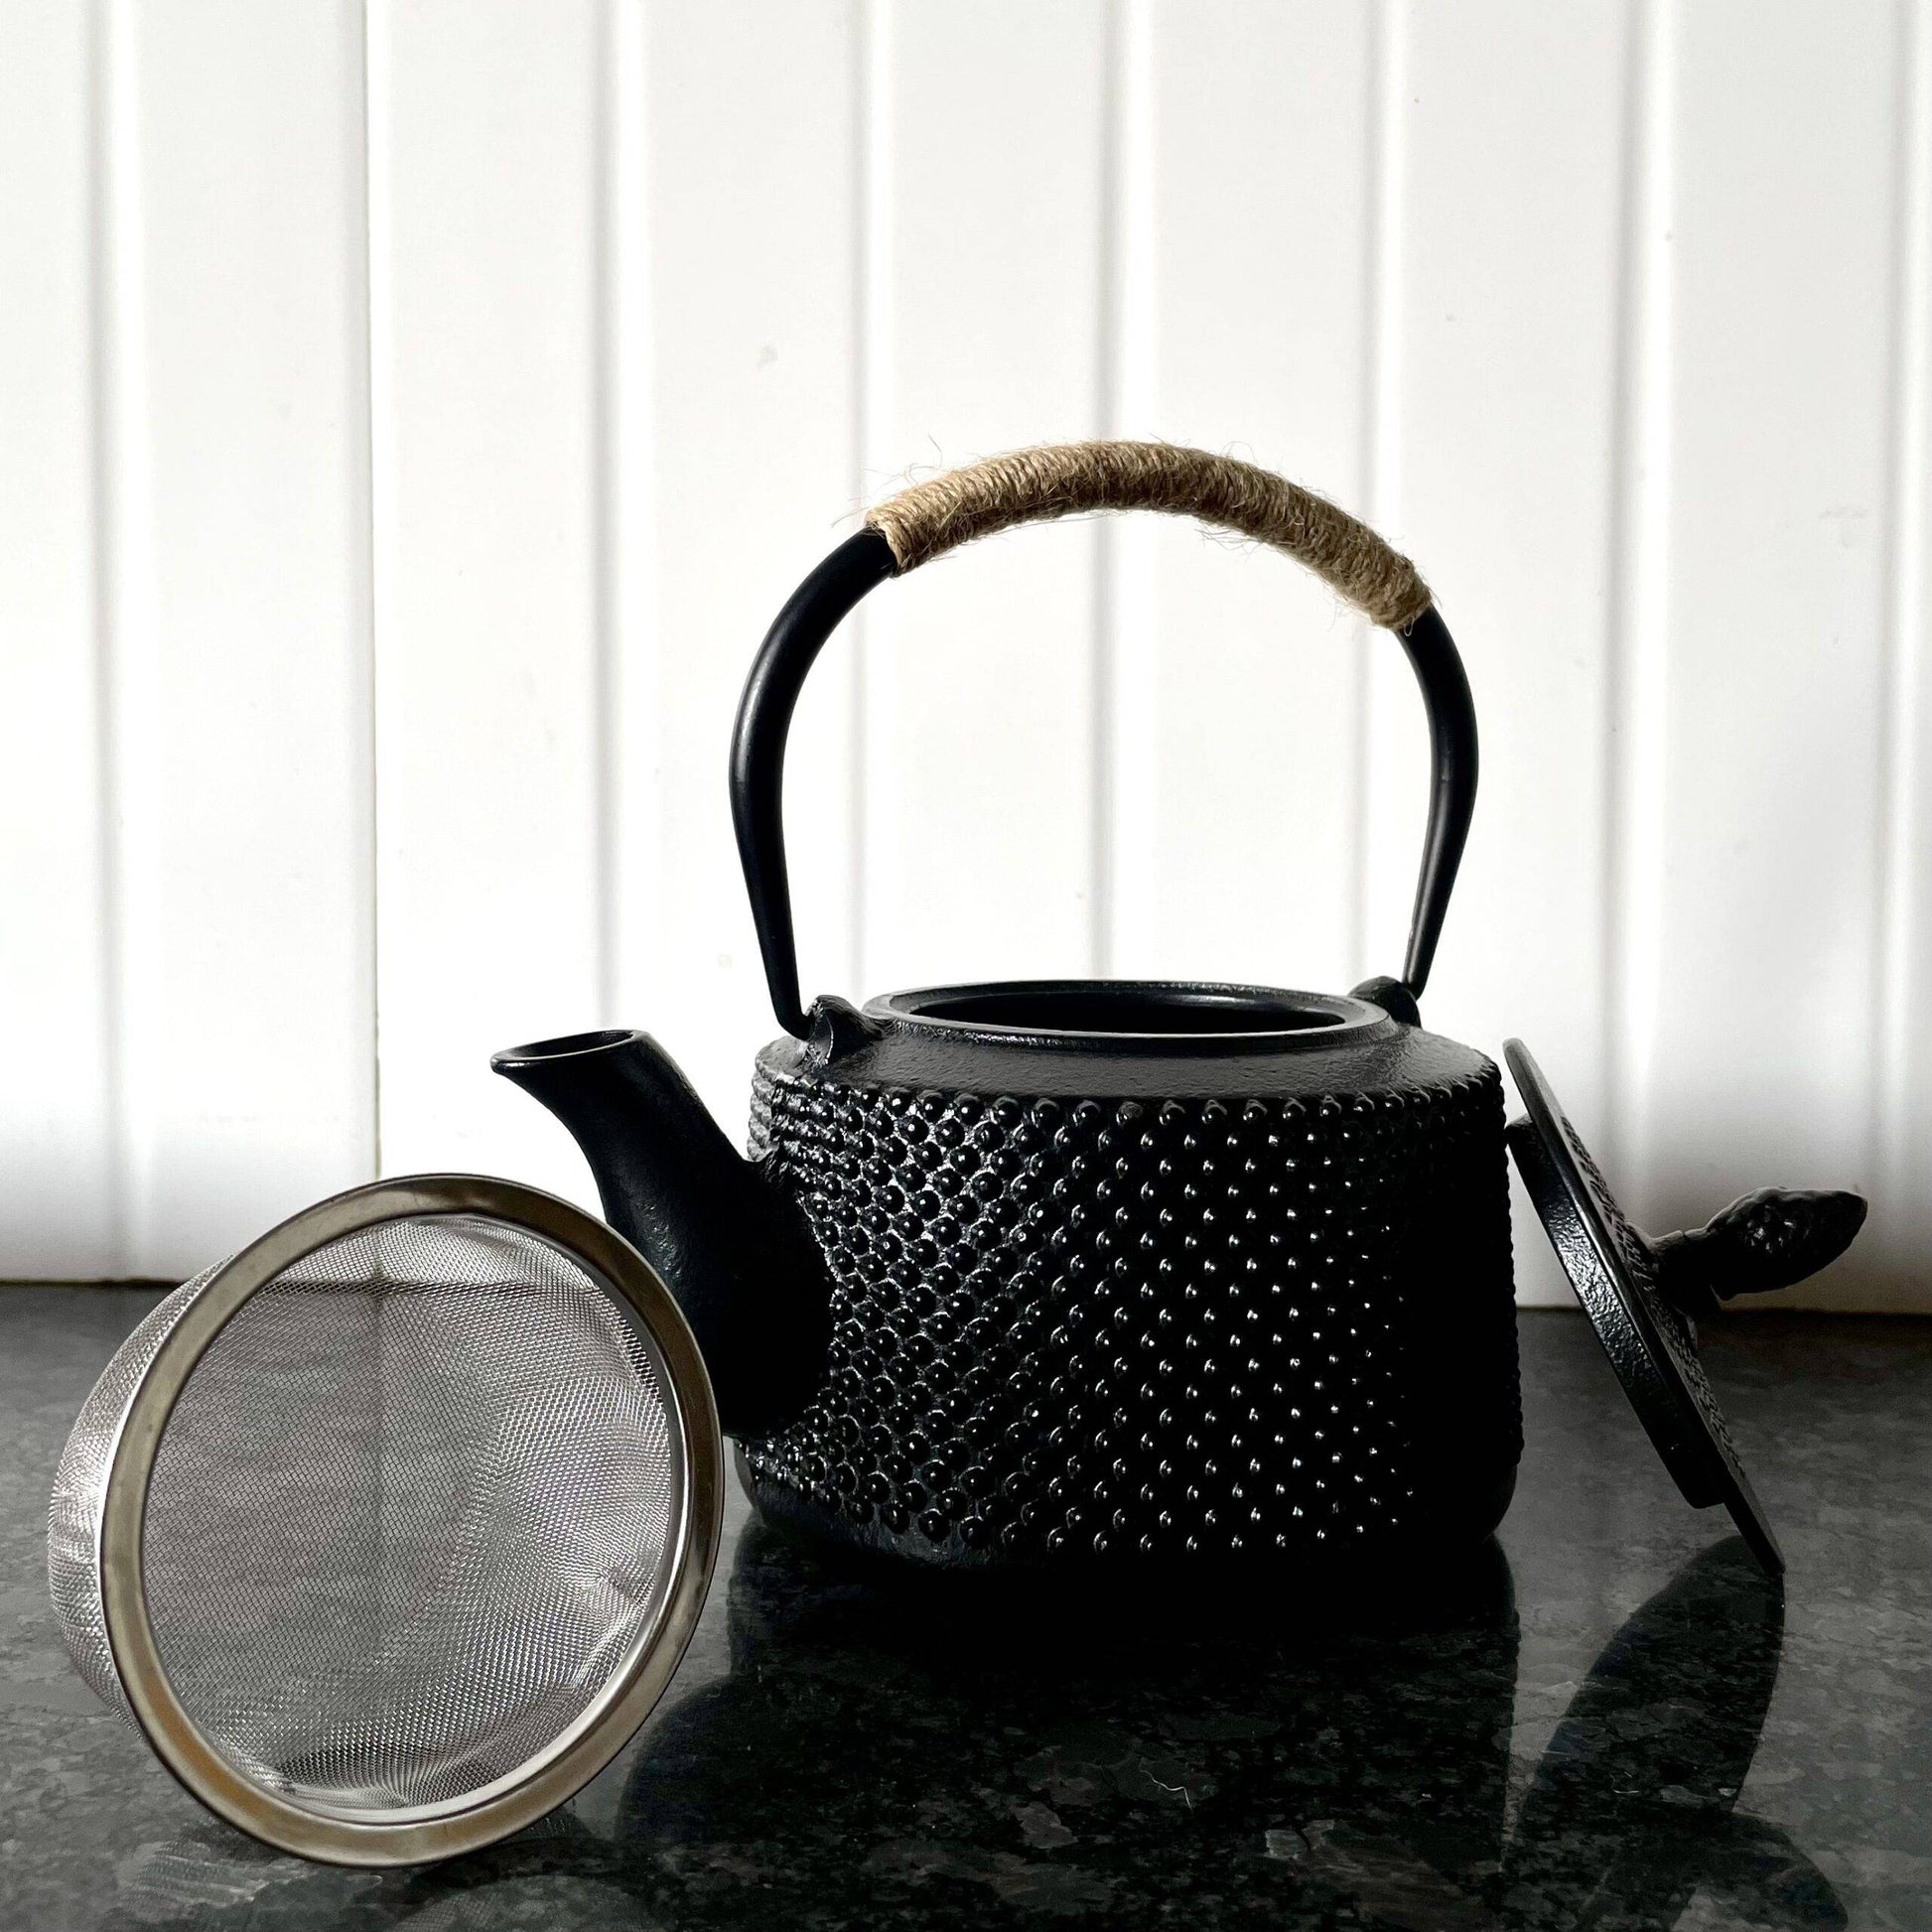 Cast-Iron Hobnail TeaPot - Traditional Japanese Tetsubin (Tetsu-Kyusu Black Arare patterned TeaPot 580ml Lid with Stainless Steel Infuser